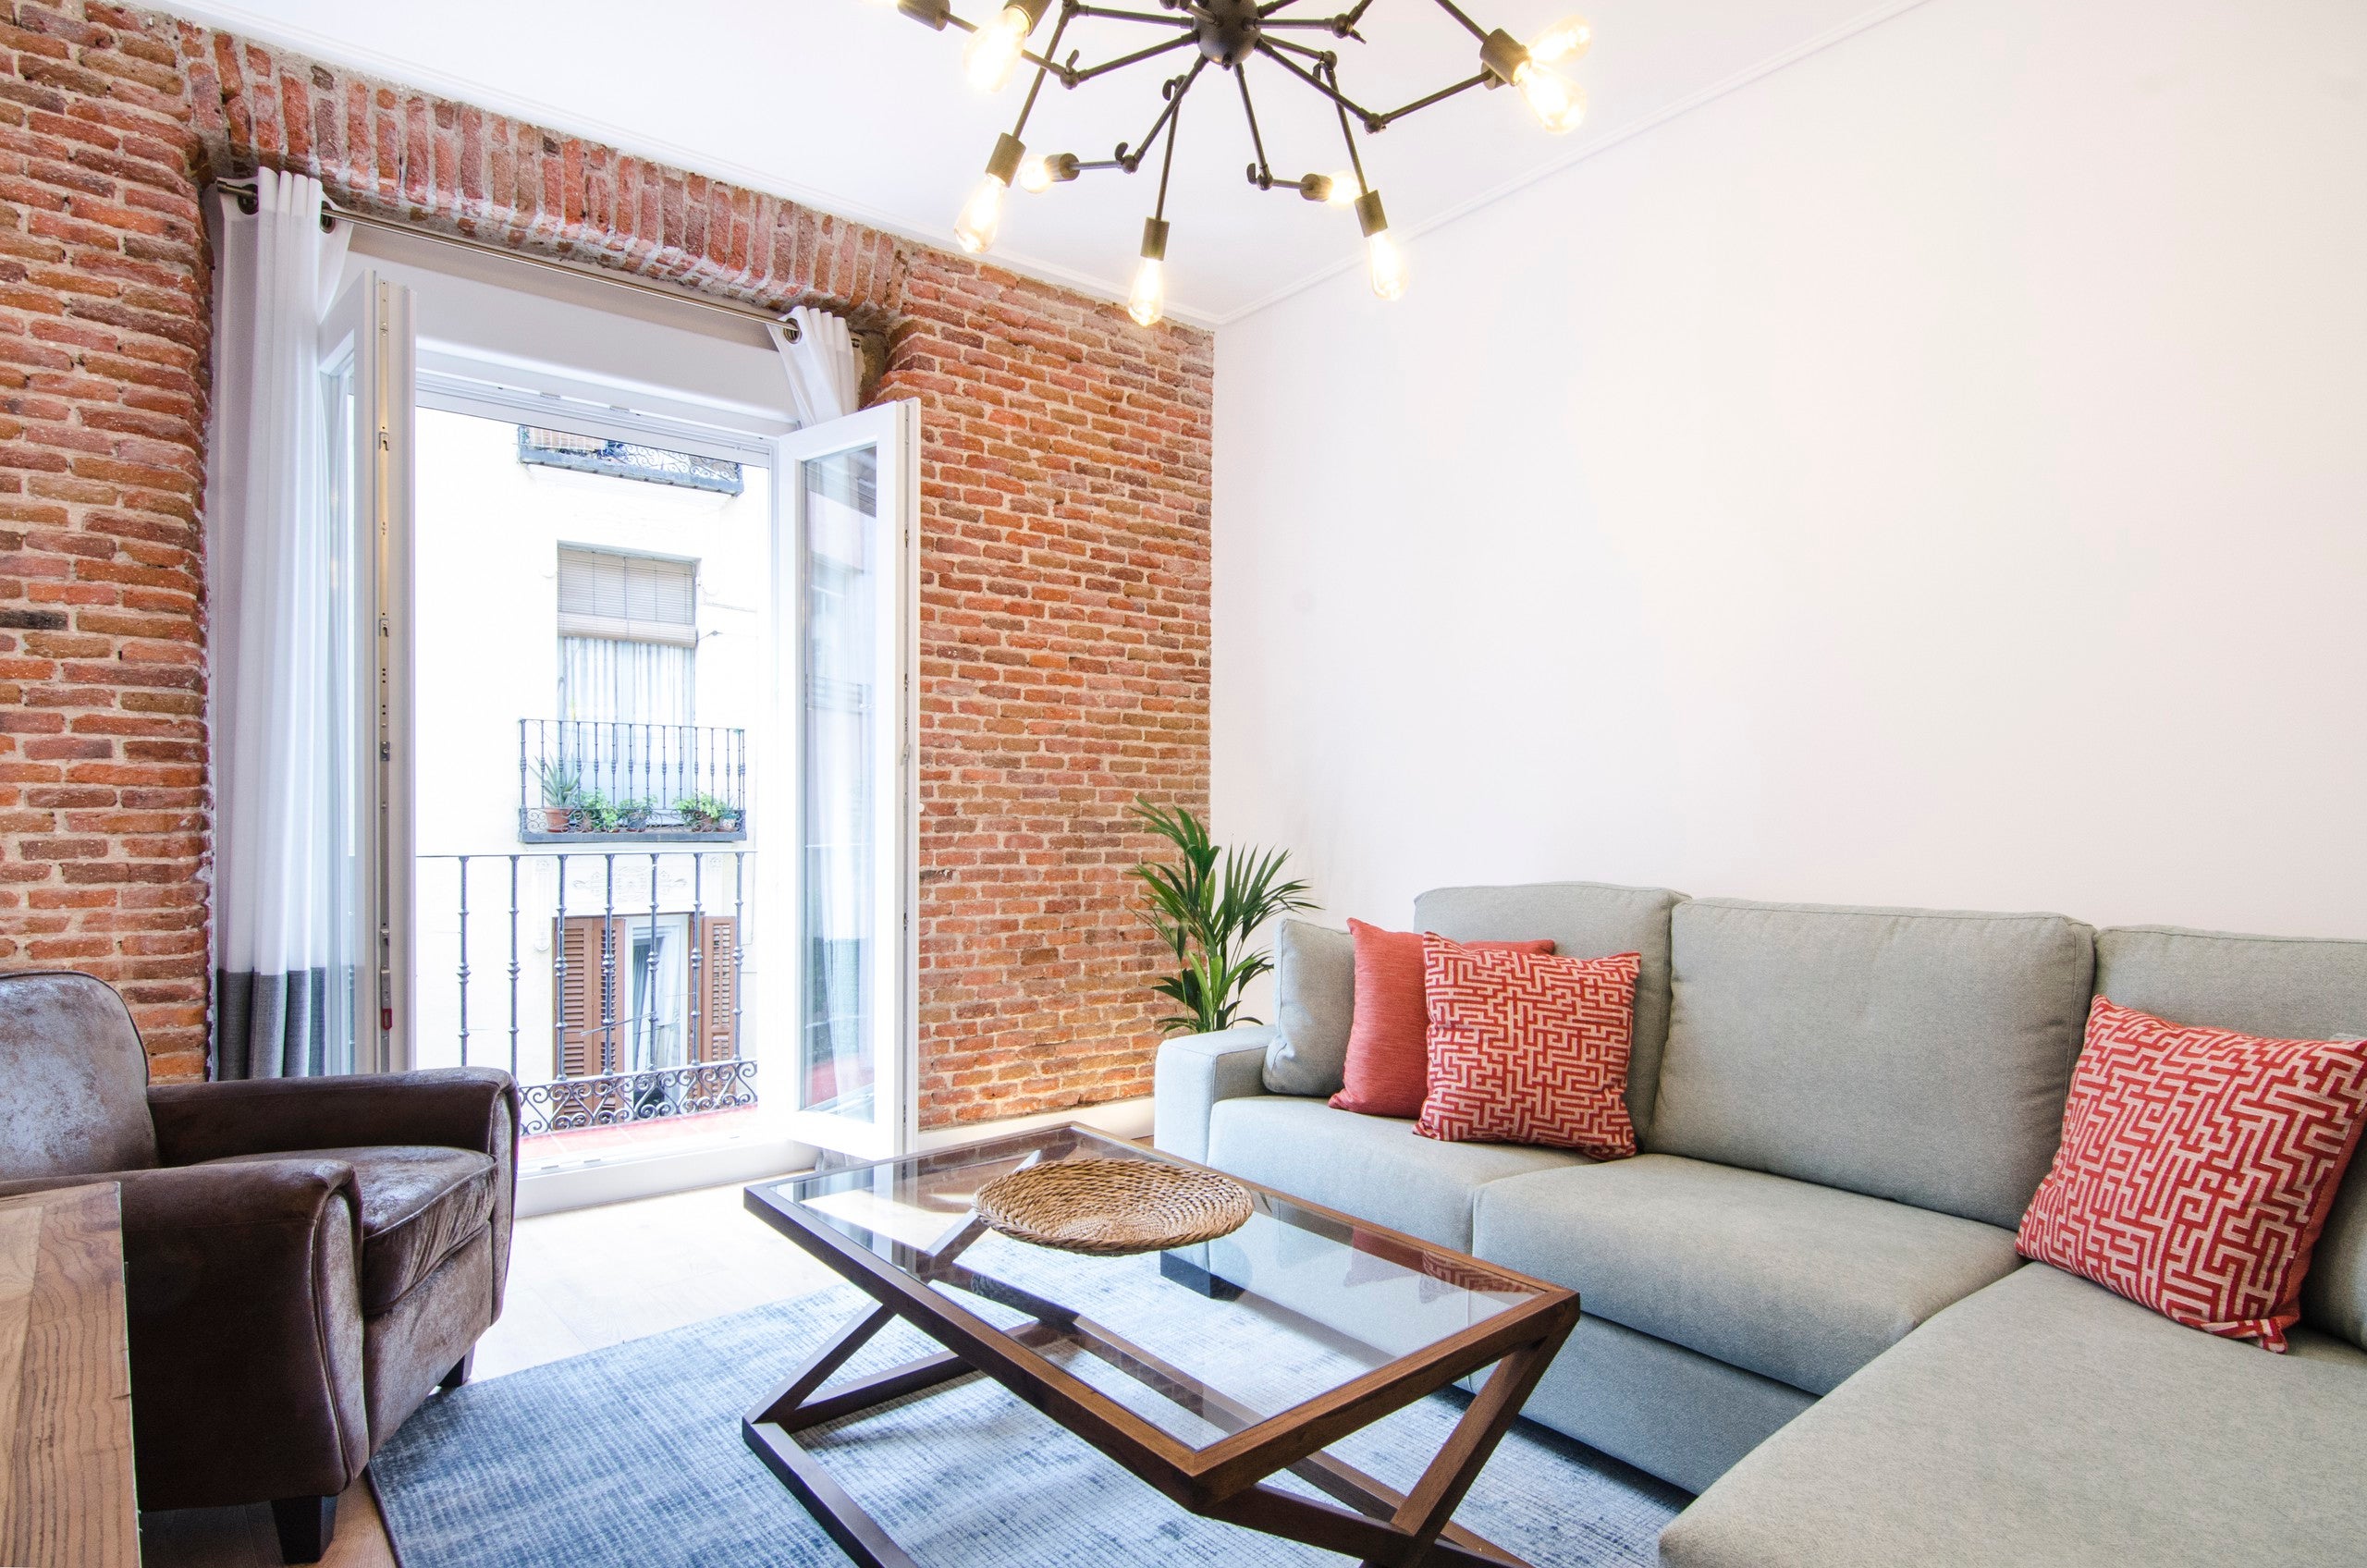 Property Image 1 - 2 bedrooms 2 bathrooms furnished - Chueca - cozy & functional - MintyStay